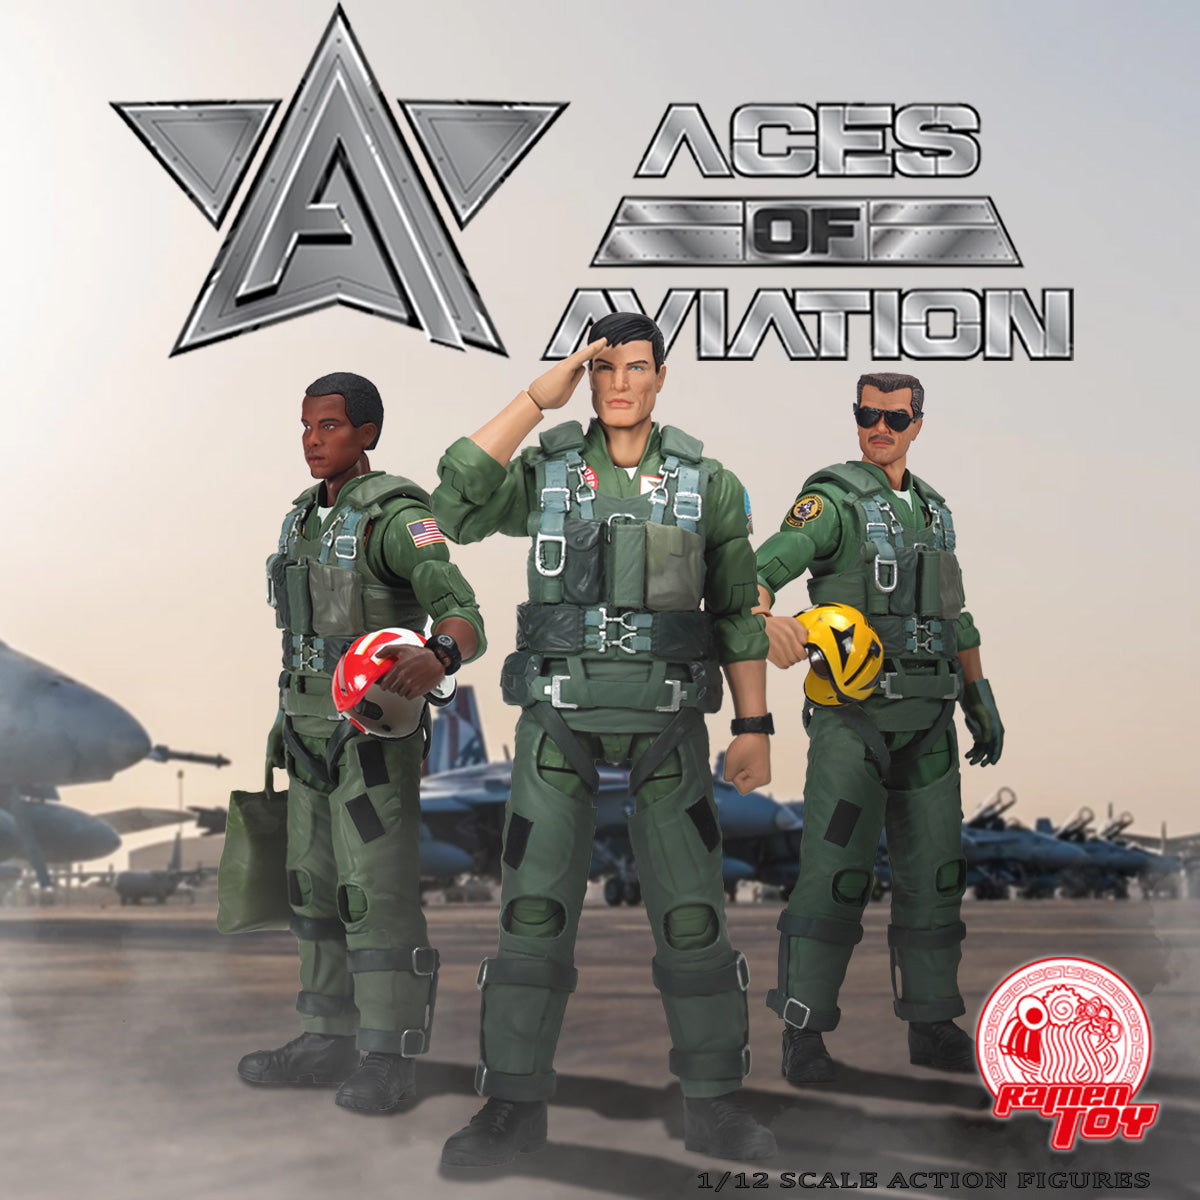 ITEM #AOA - Aces of Aviation (PRE-ORDER) #EarlyBirdPrice